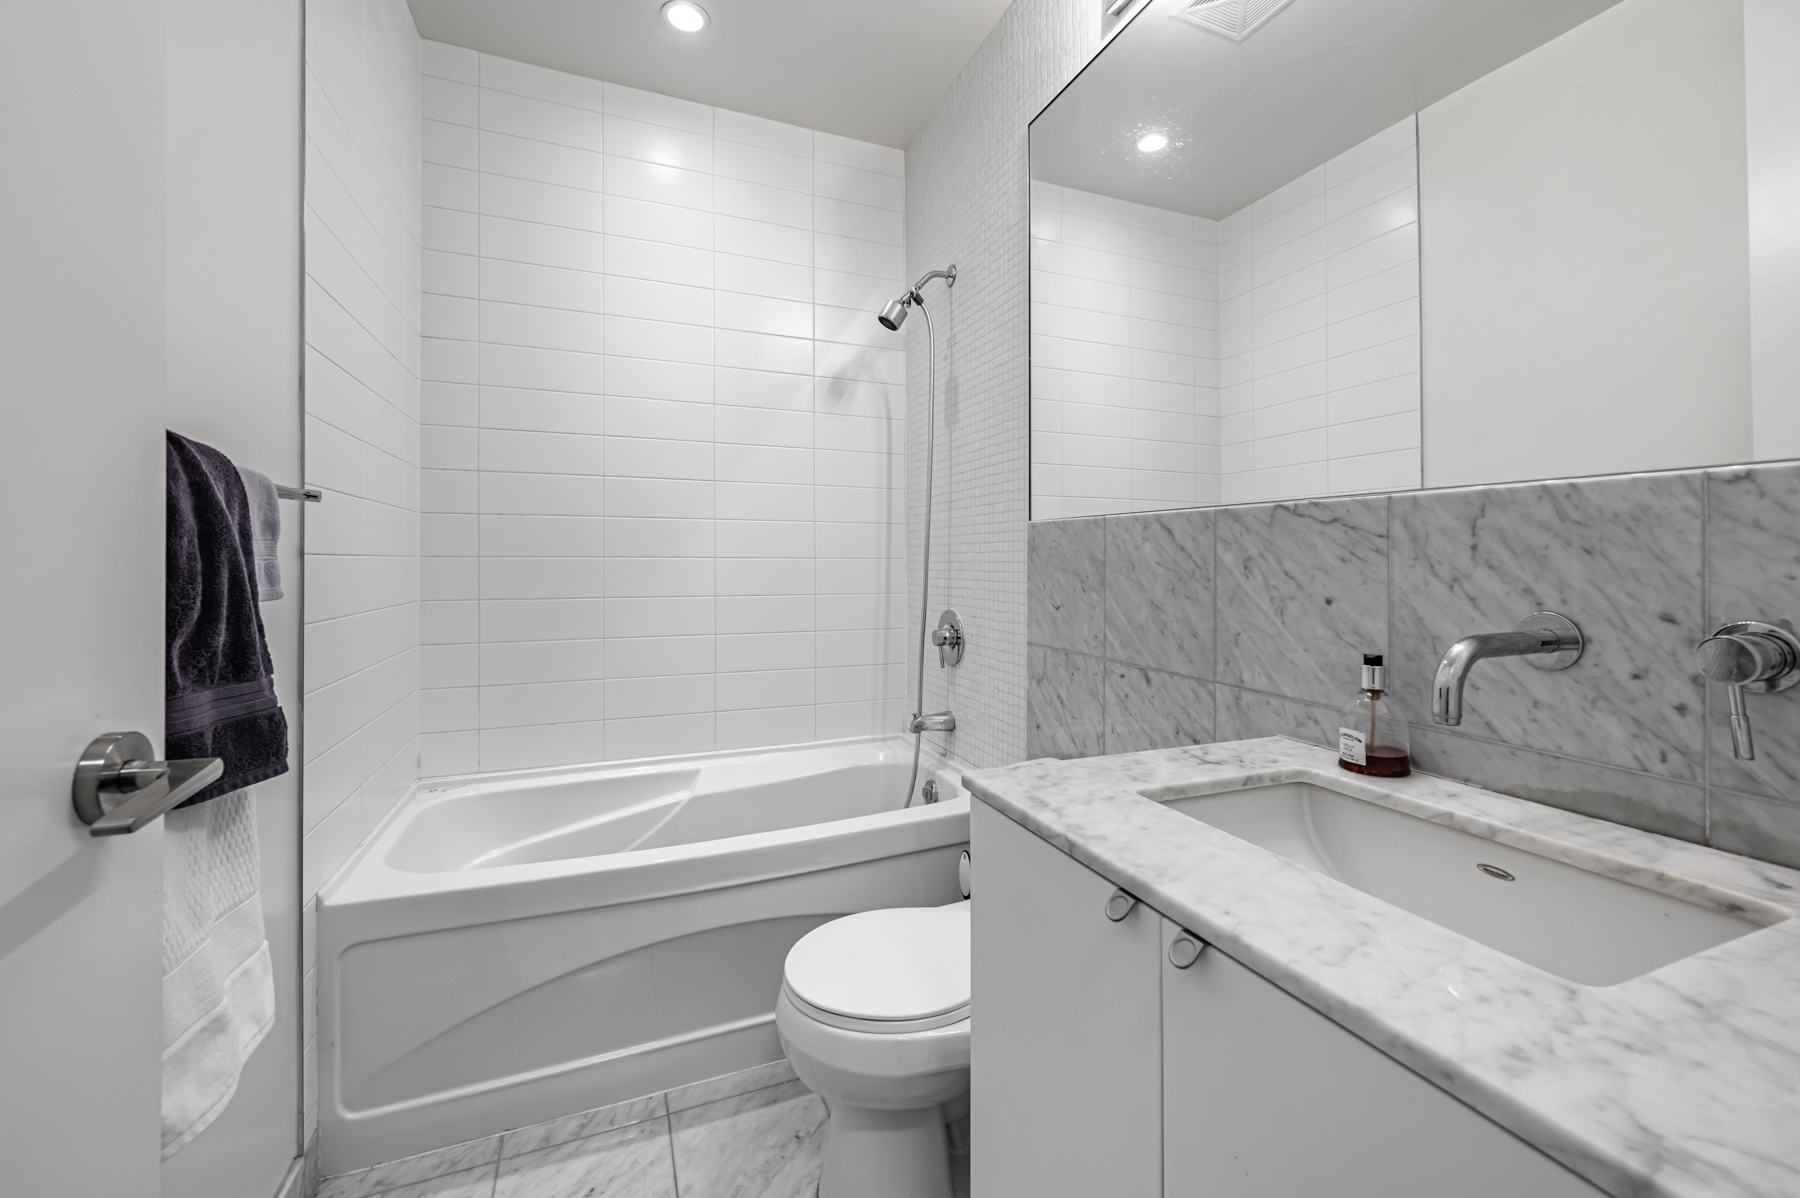 Ensuite bath with gray walls, floors, counters - 380 Macpherson Ave # 517.